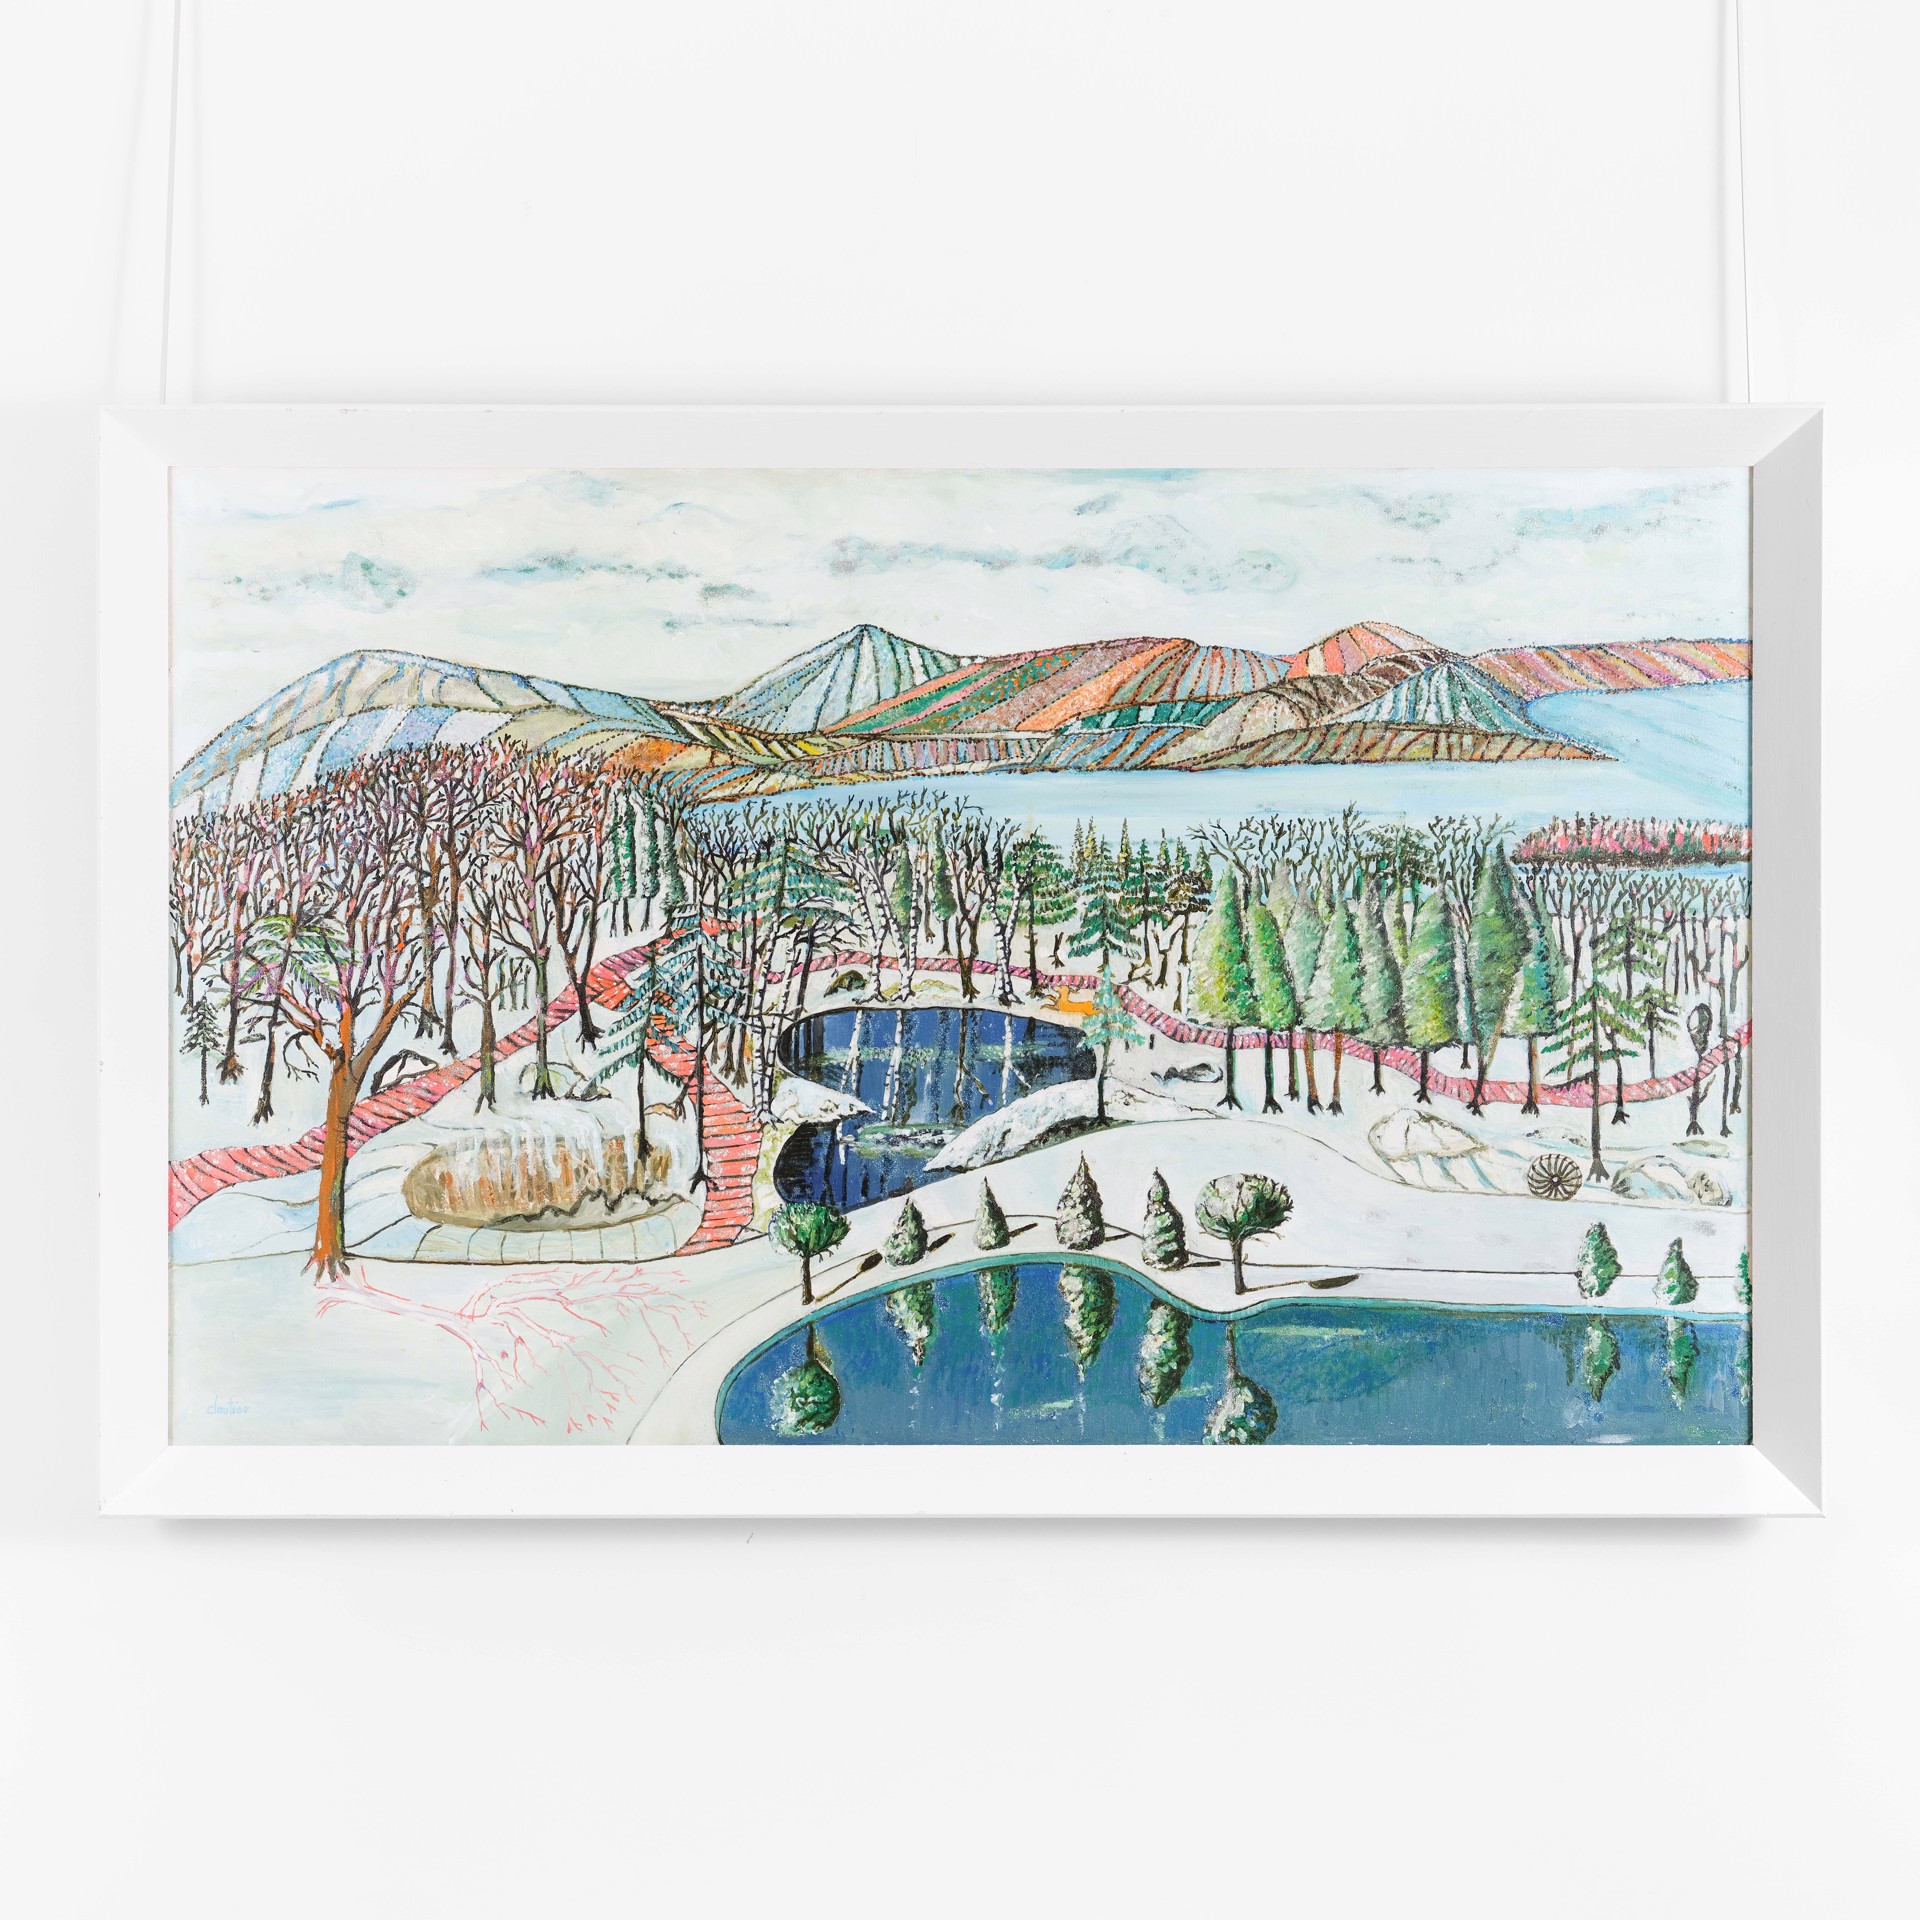 Paysage d'hiver - Lac Brome by Odile Cloutier